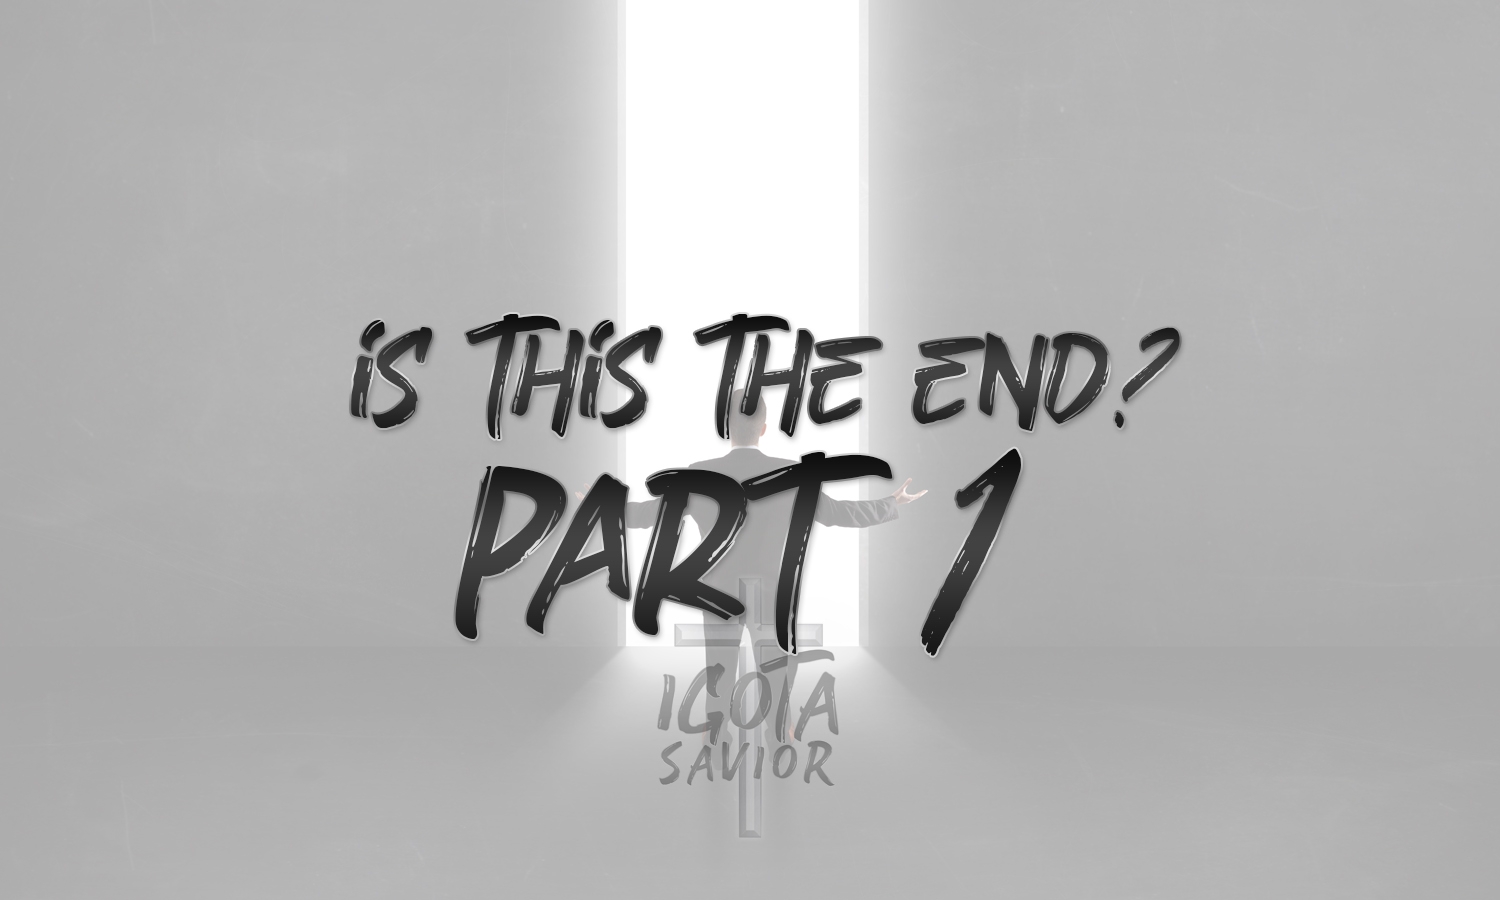 Is This The End? Part 1